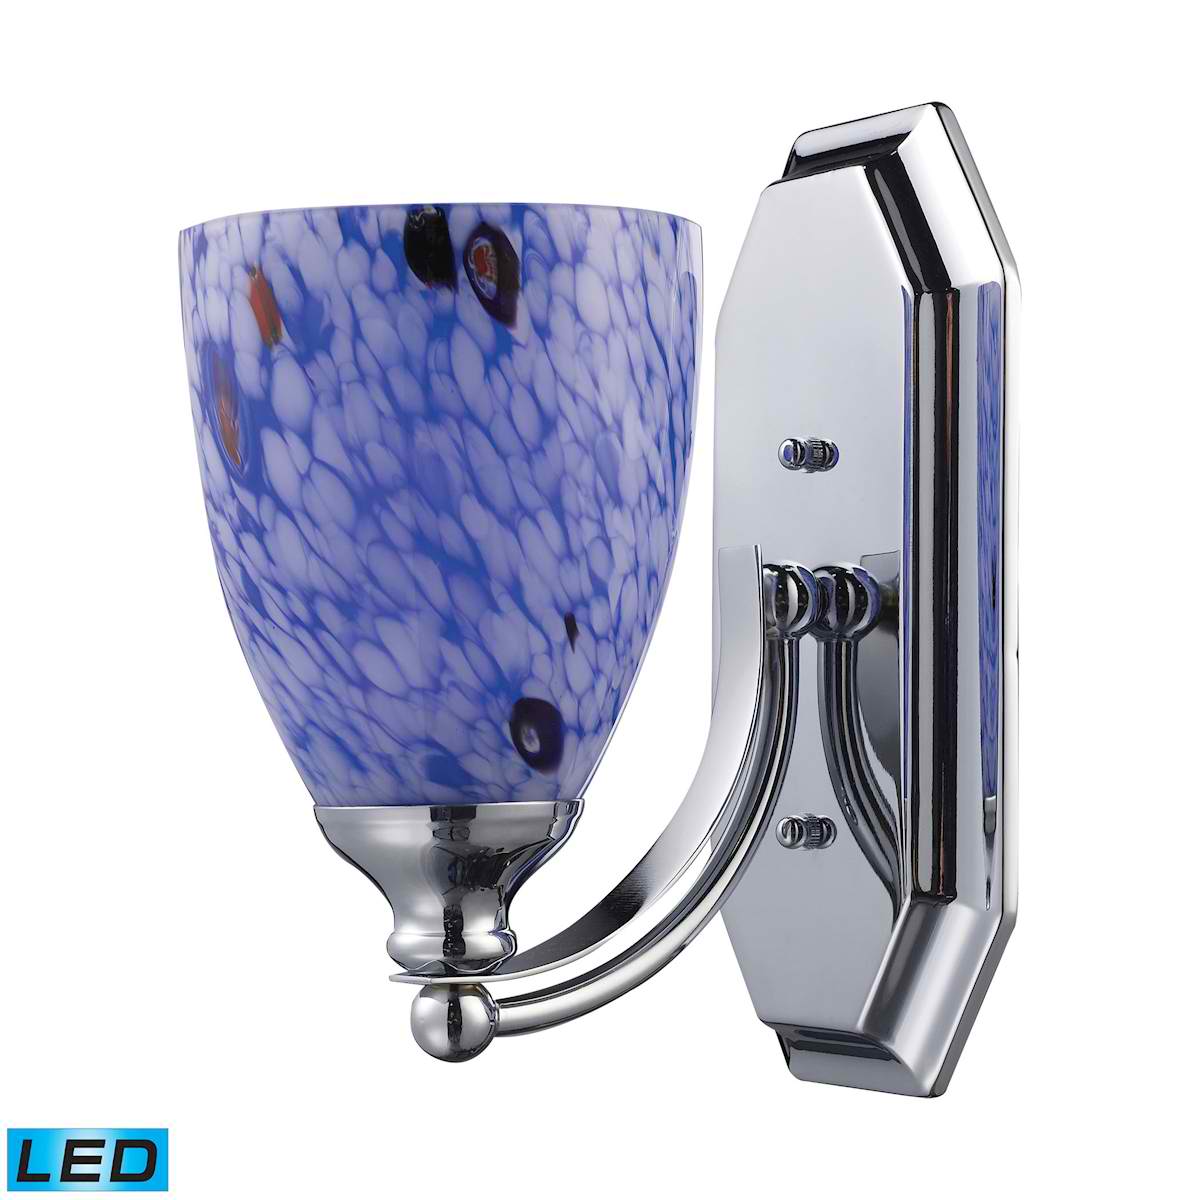 1 Light Vanity in Polished Chrome and Starburst Blue Glass - LED Offering Up To 800 Lumens (60 Watt Equivalent)